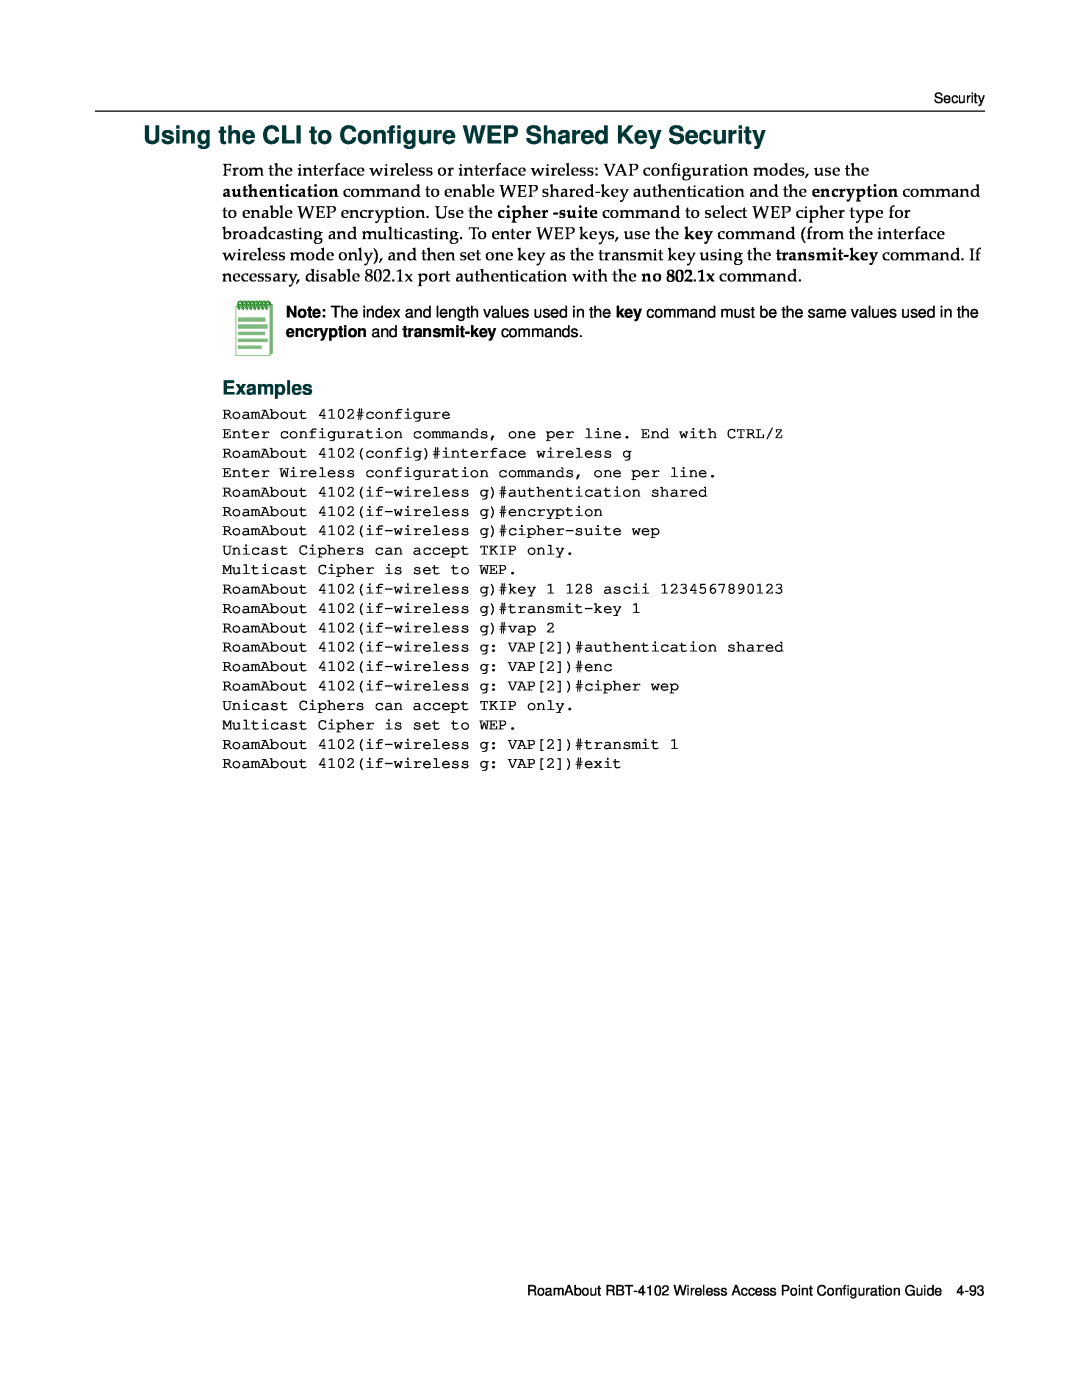 Enterasys Networks RBT-4102 manual Using the CLI to Configure WEP Shared Key Security, Examples 